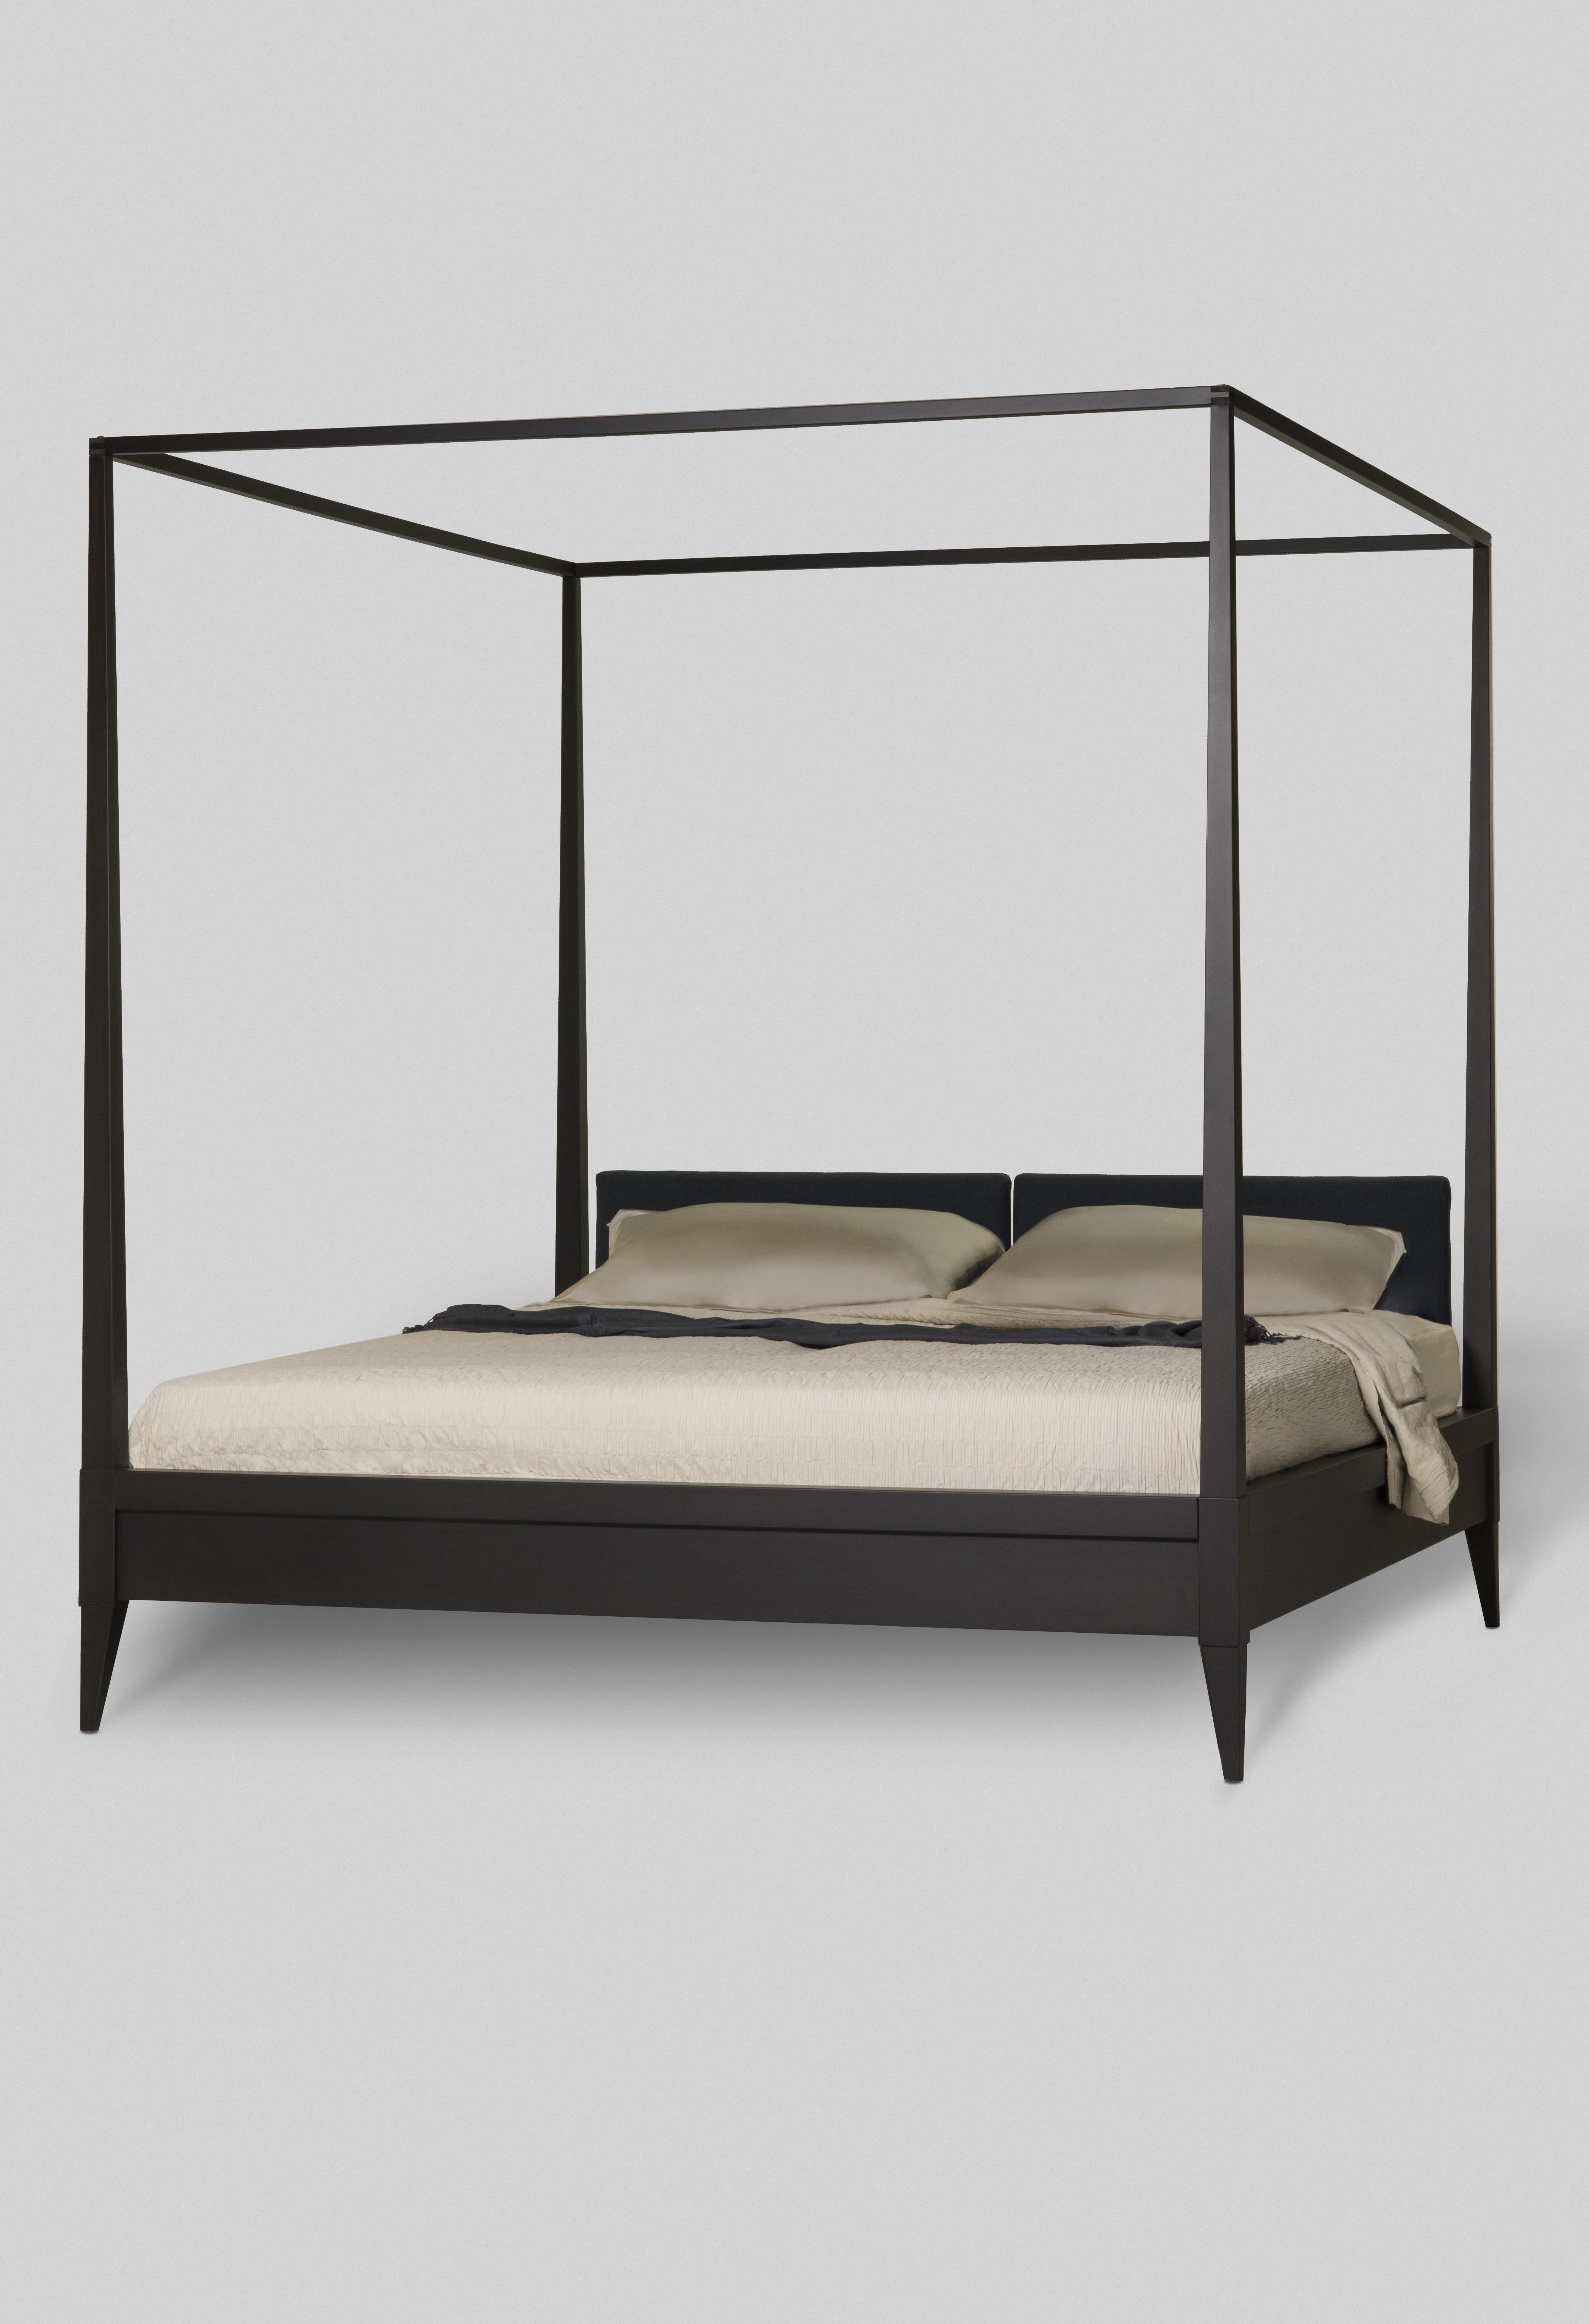 Valentino, canopy bed made of cherry wood as well as in ash wood, with upholstered headboard.
Mattress size
160 x 200
170 x 195
180 x 200
and more options..

Available in different finishes and coatings.
Made in Italy by Morelato
 